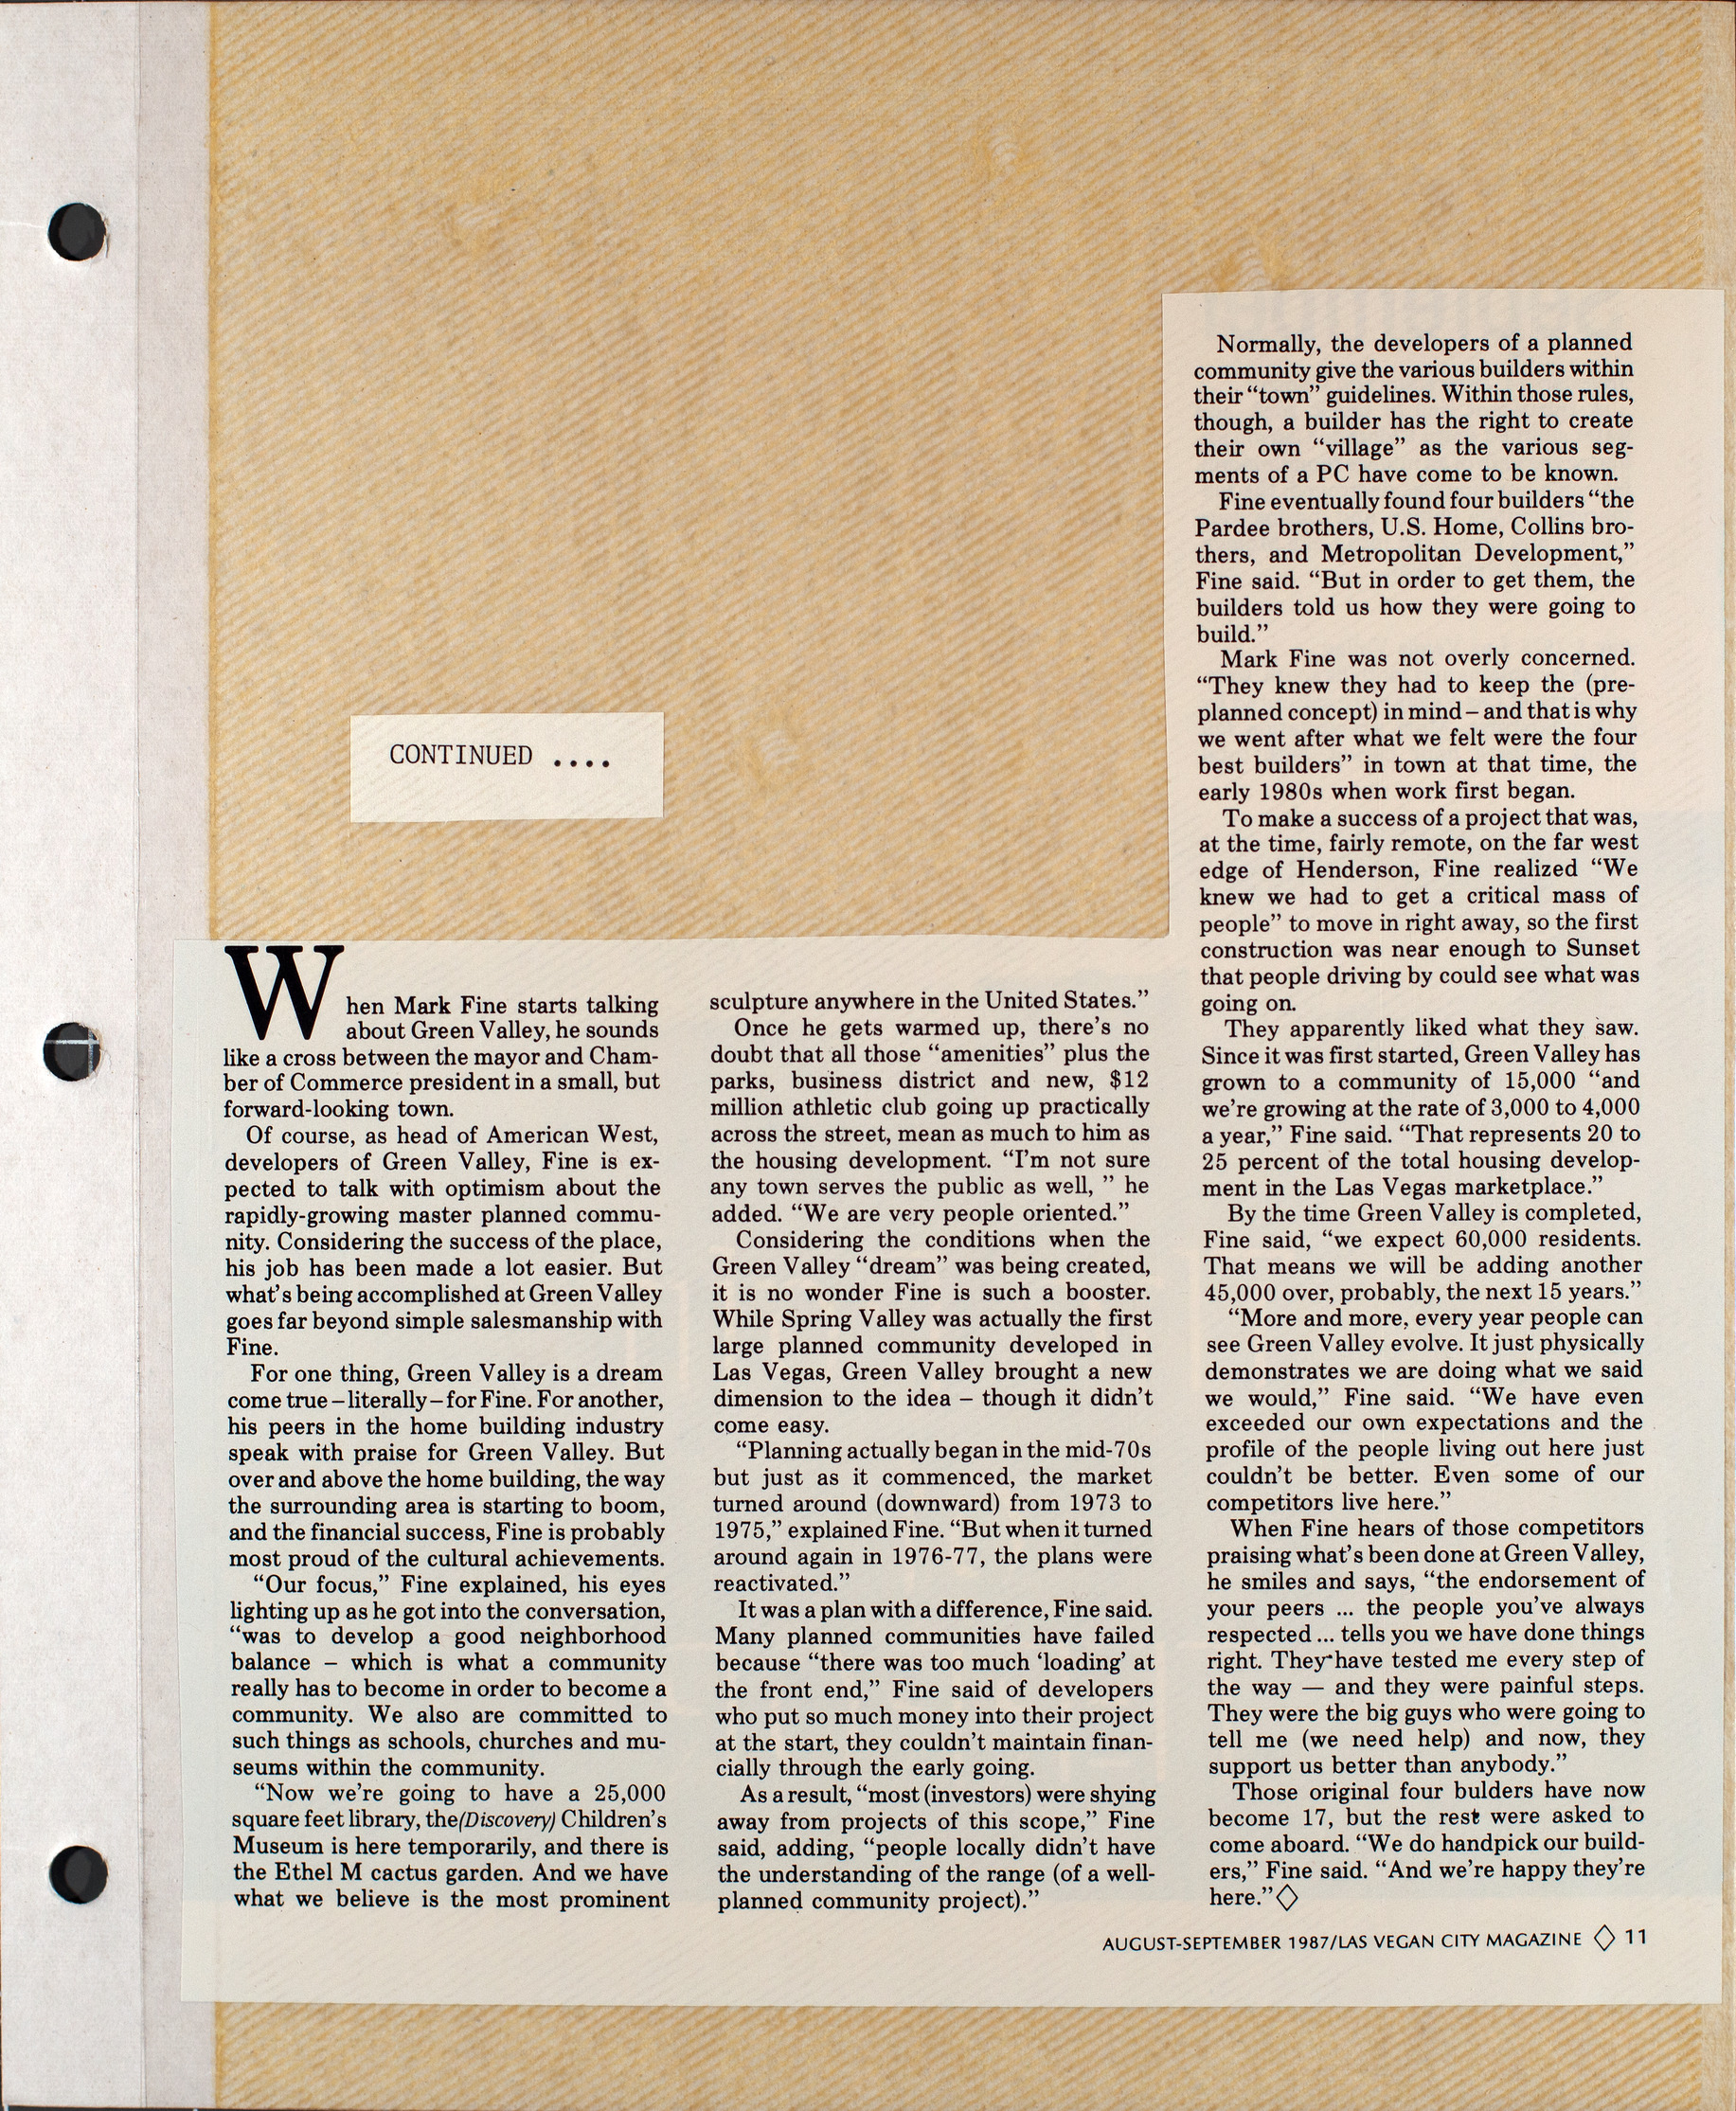 Clippings, Mark Fine - Ten years After, Las Vegan City Magazine, August-September 1987